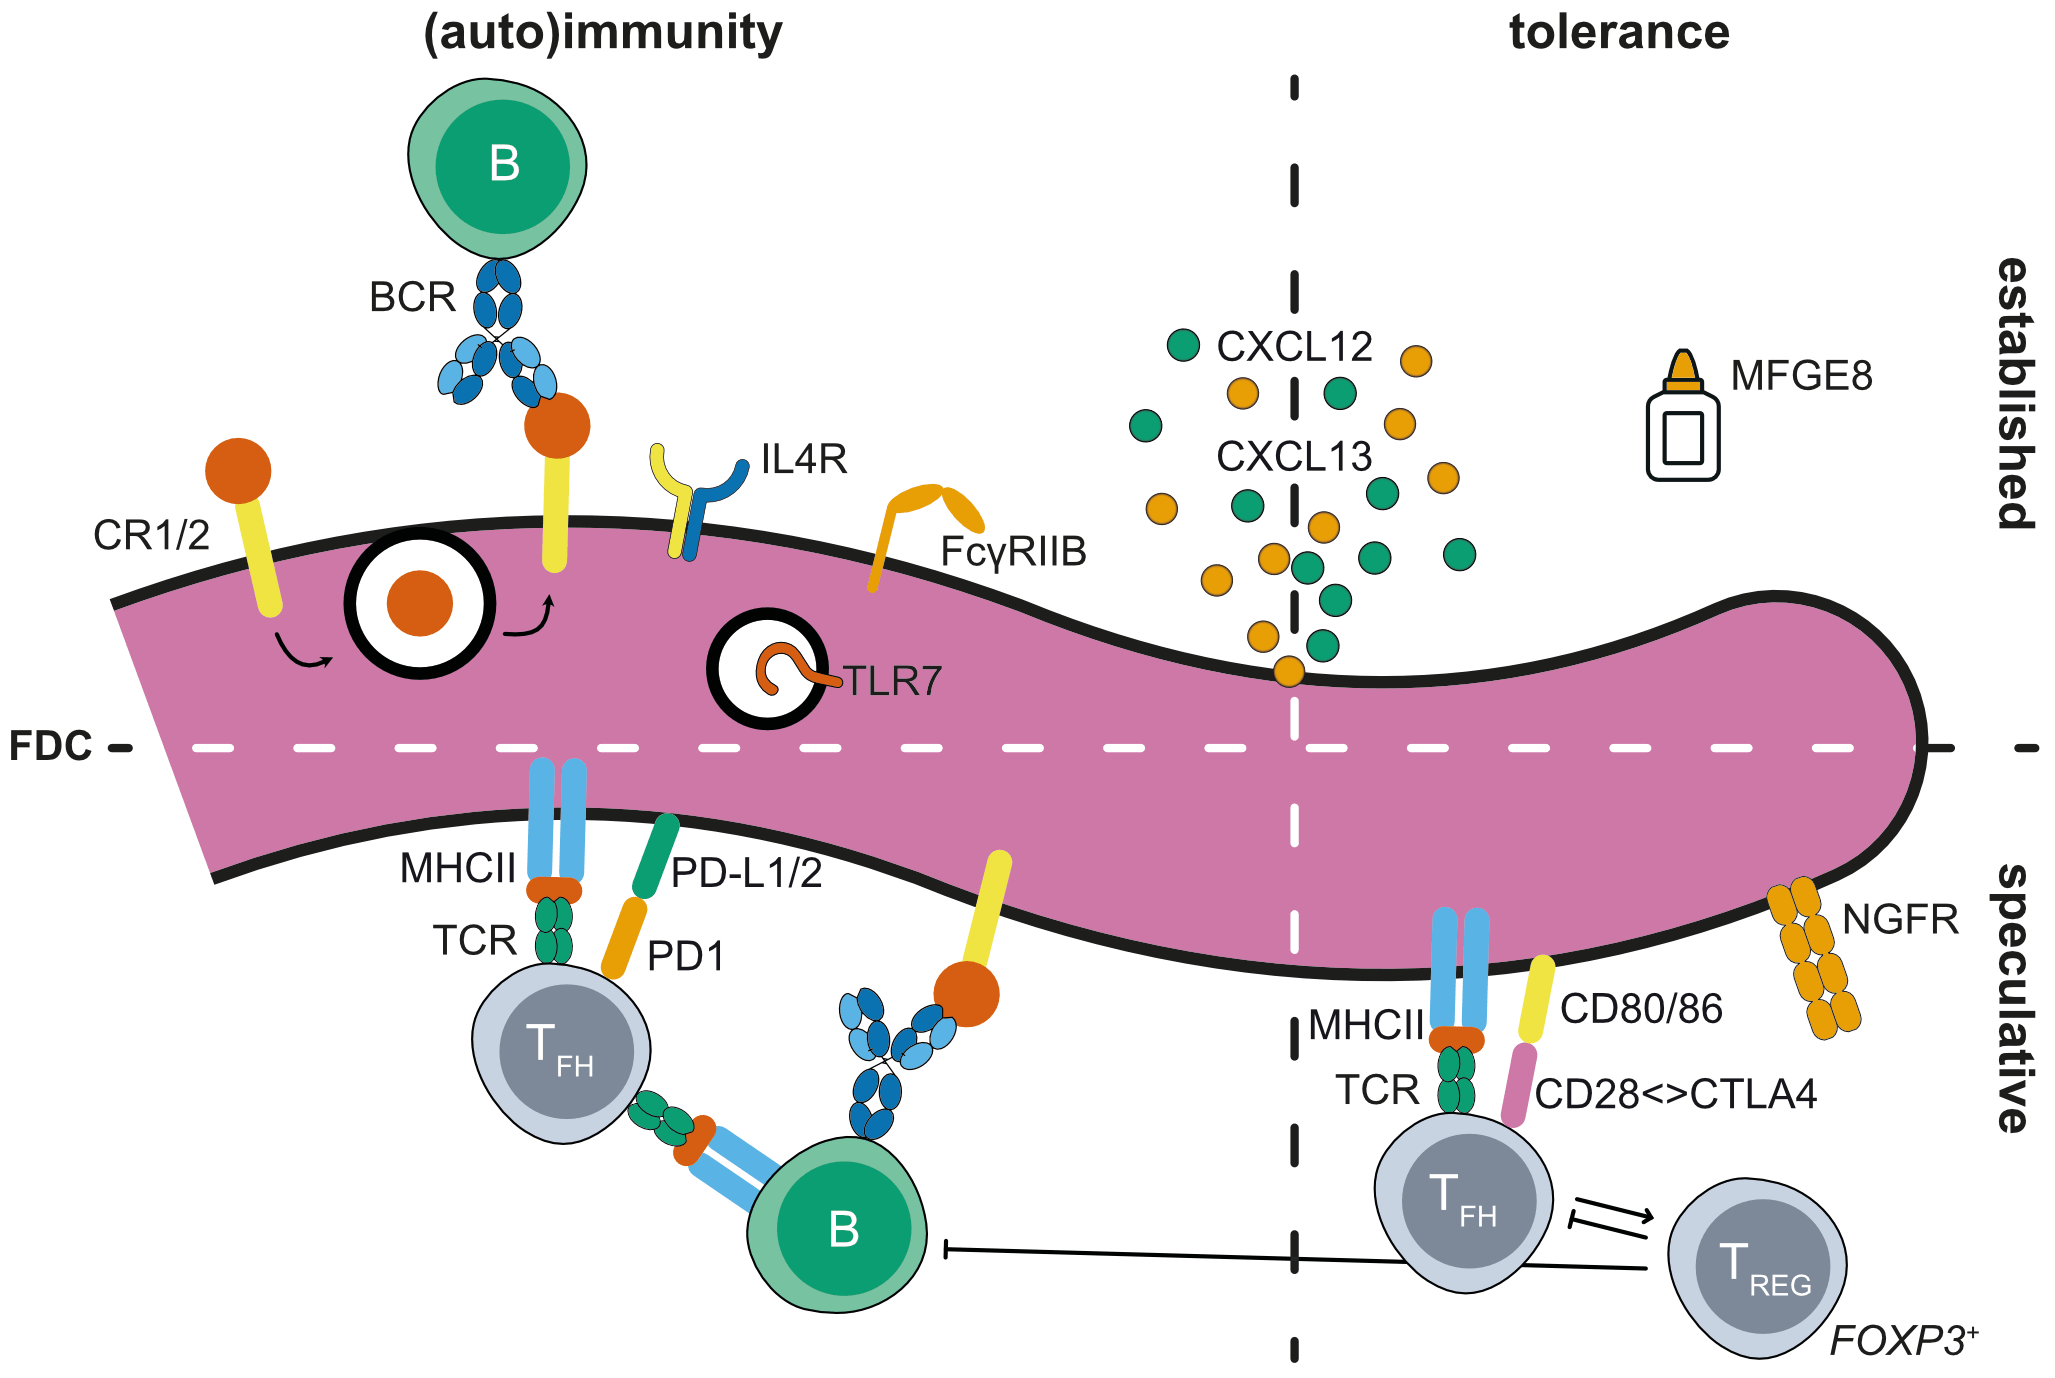 The FDC: At the germinal center of autoimmunity? (Review)